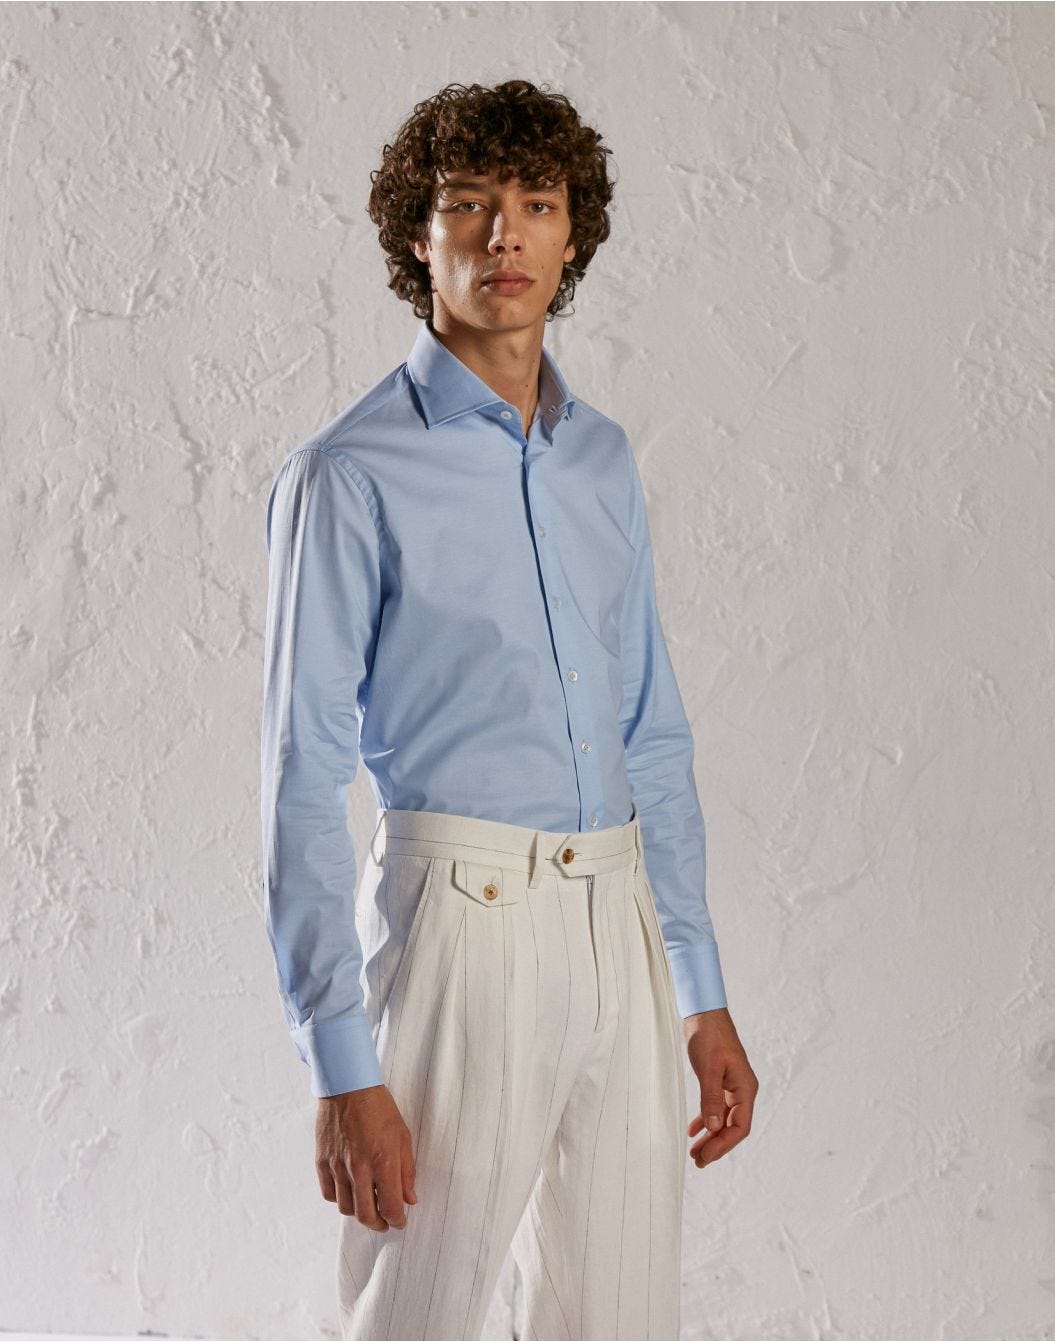 Stainproof stretch cotton shirt